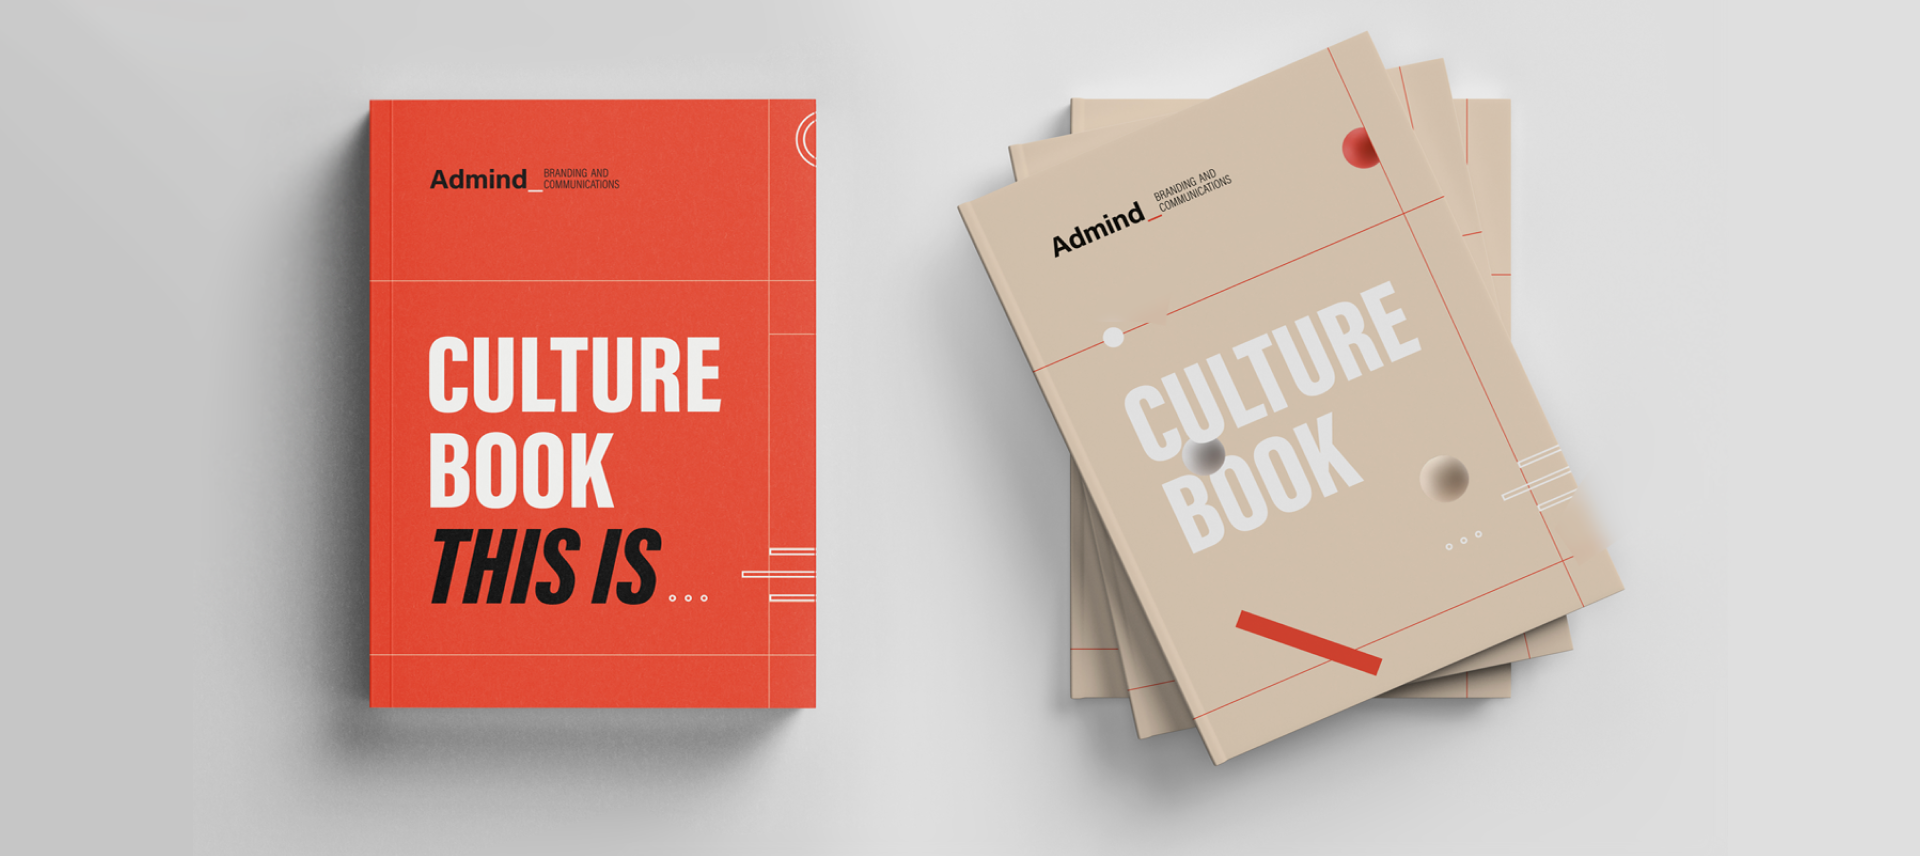 Company Culture Book – capturing the art of diversity